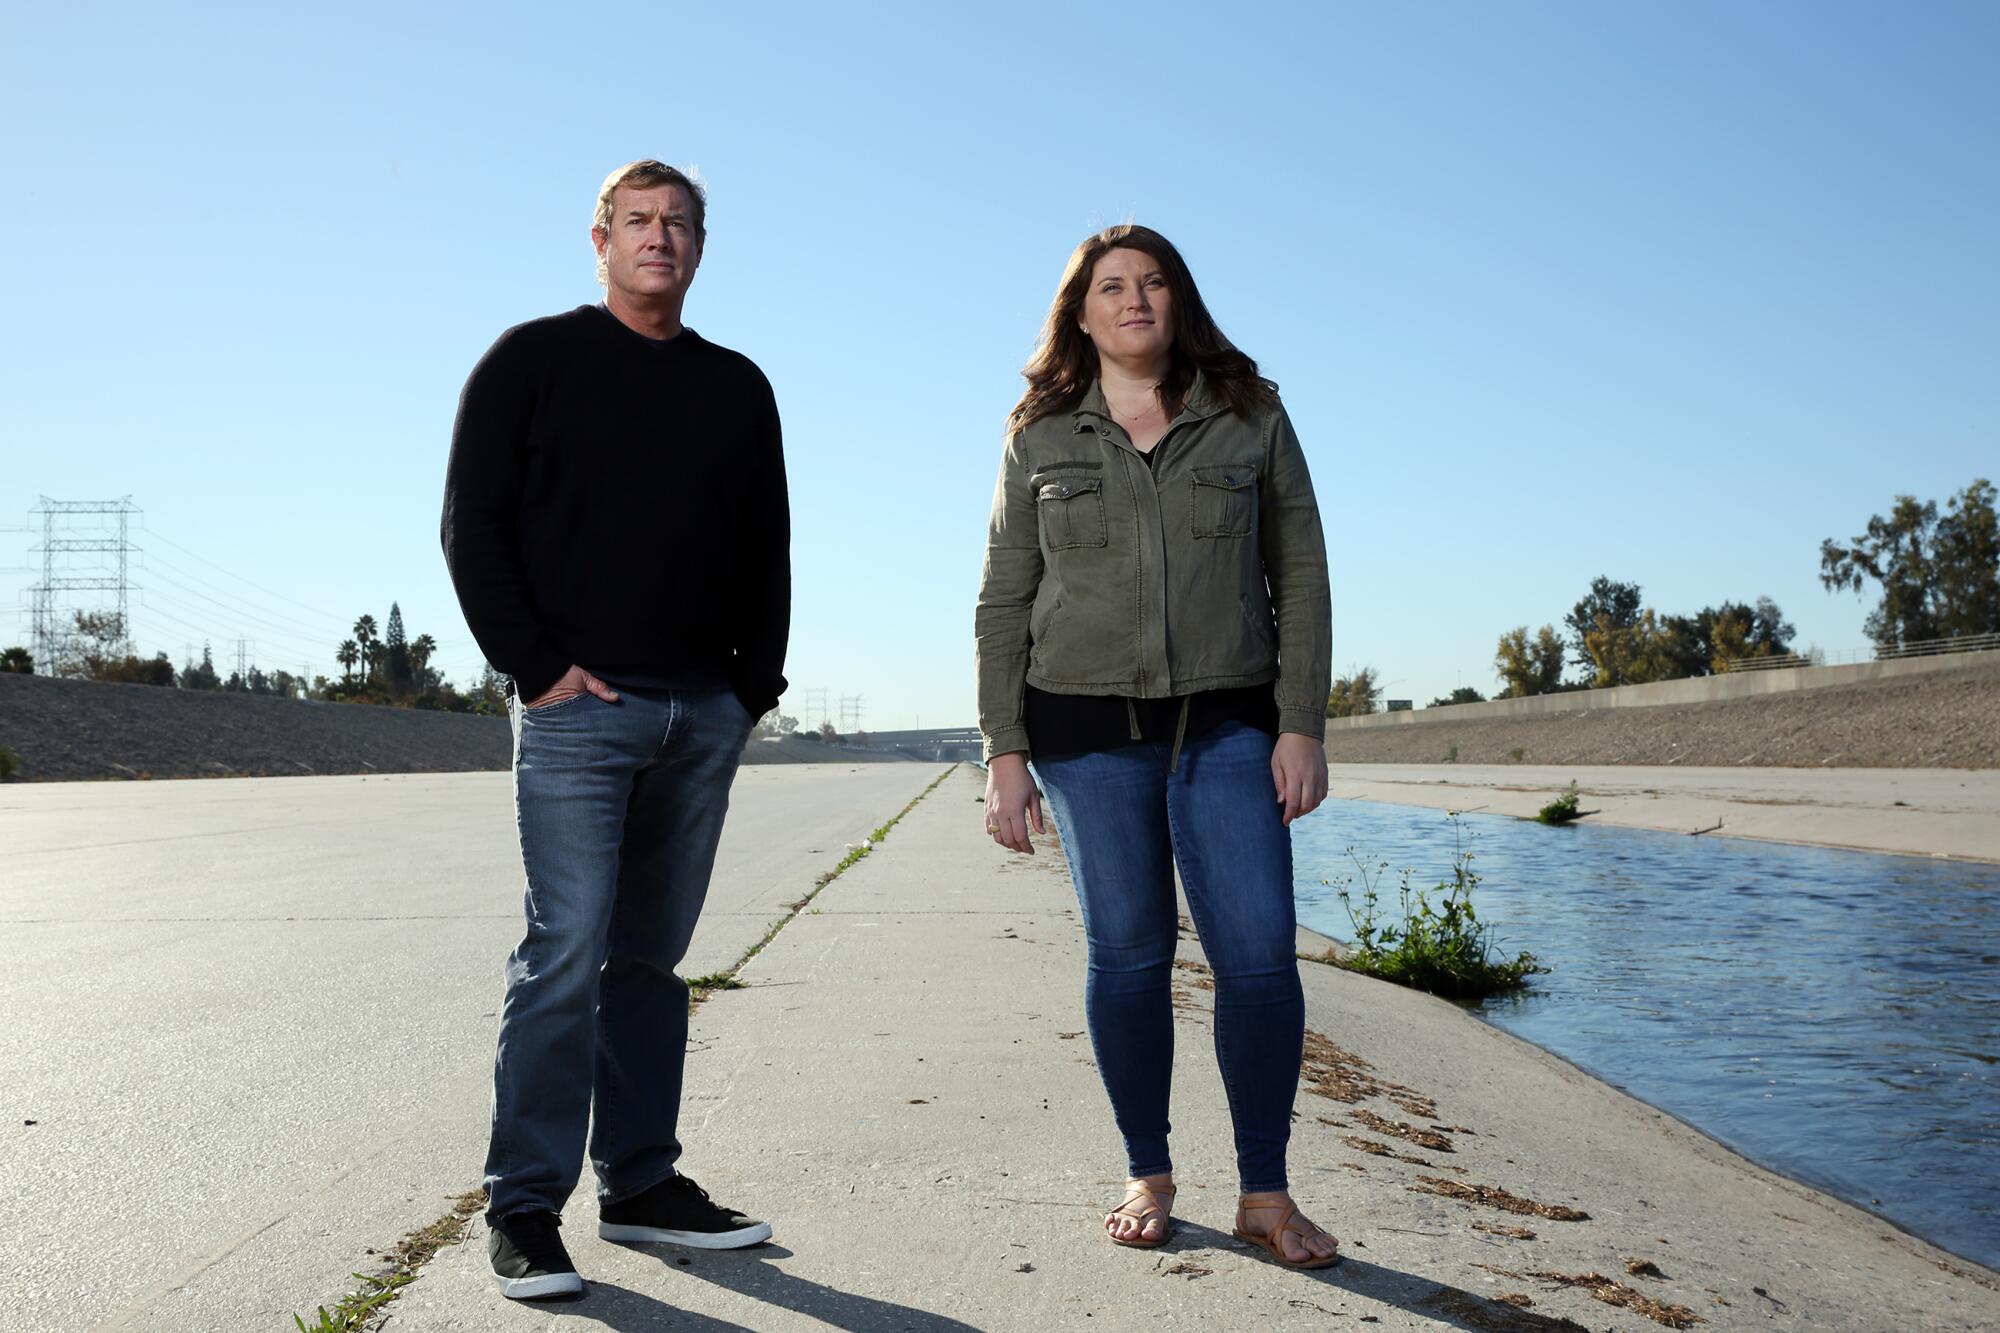 Hydrologist Mark Hanna and landscape architect Jessica Henson at the L.A. River's confluence with the Rio Hondo in South Gate